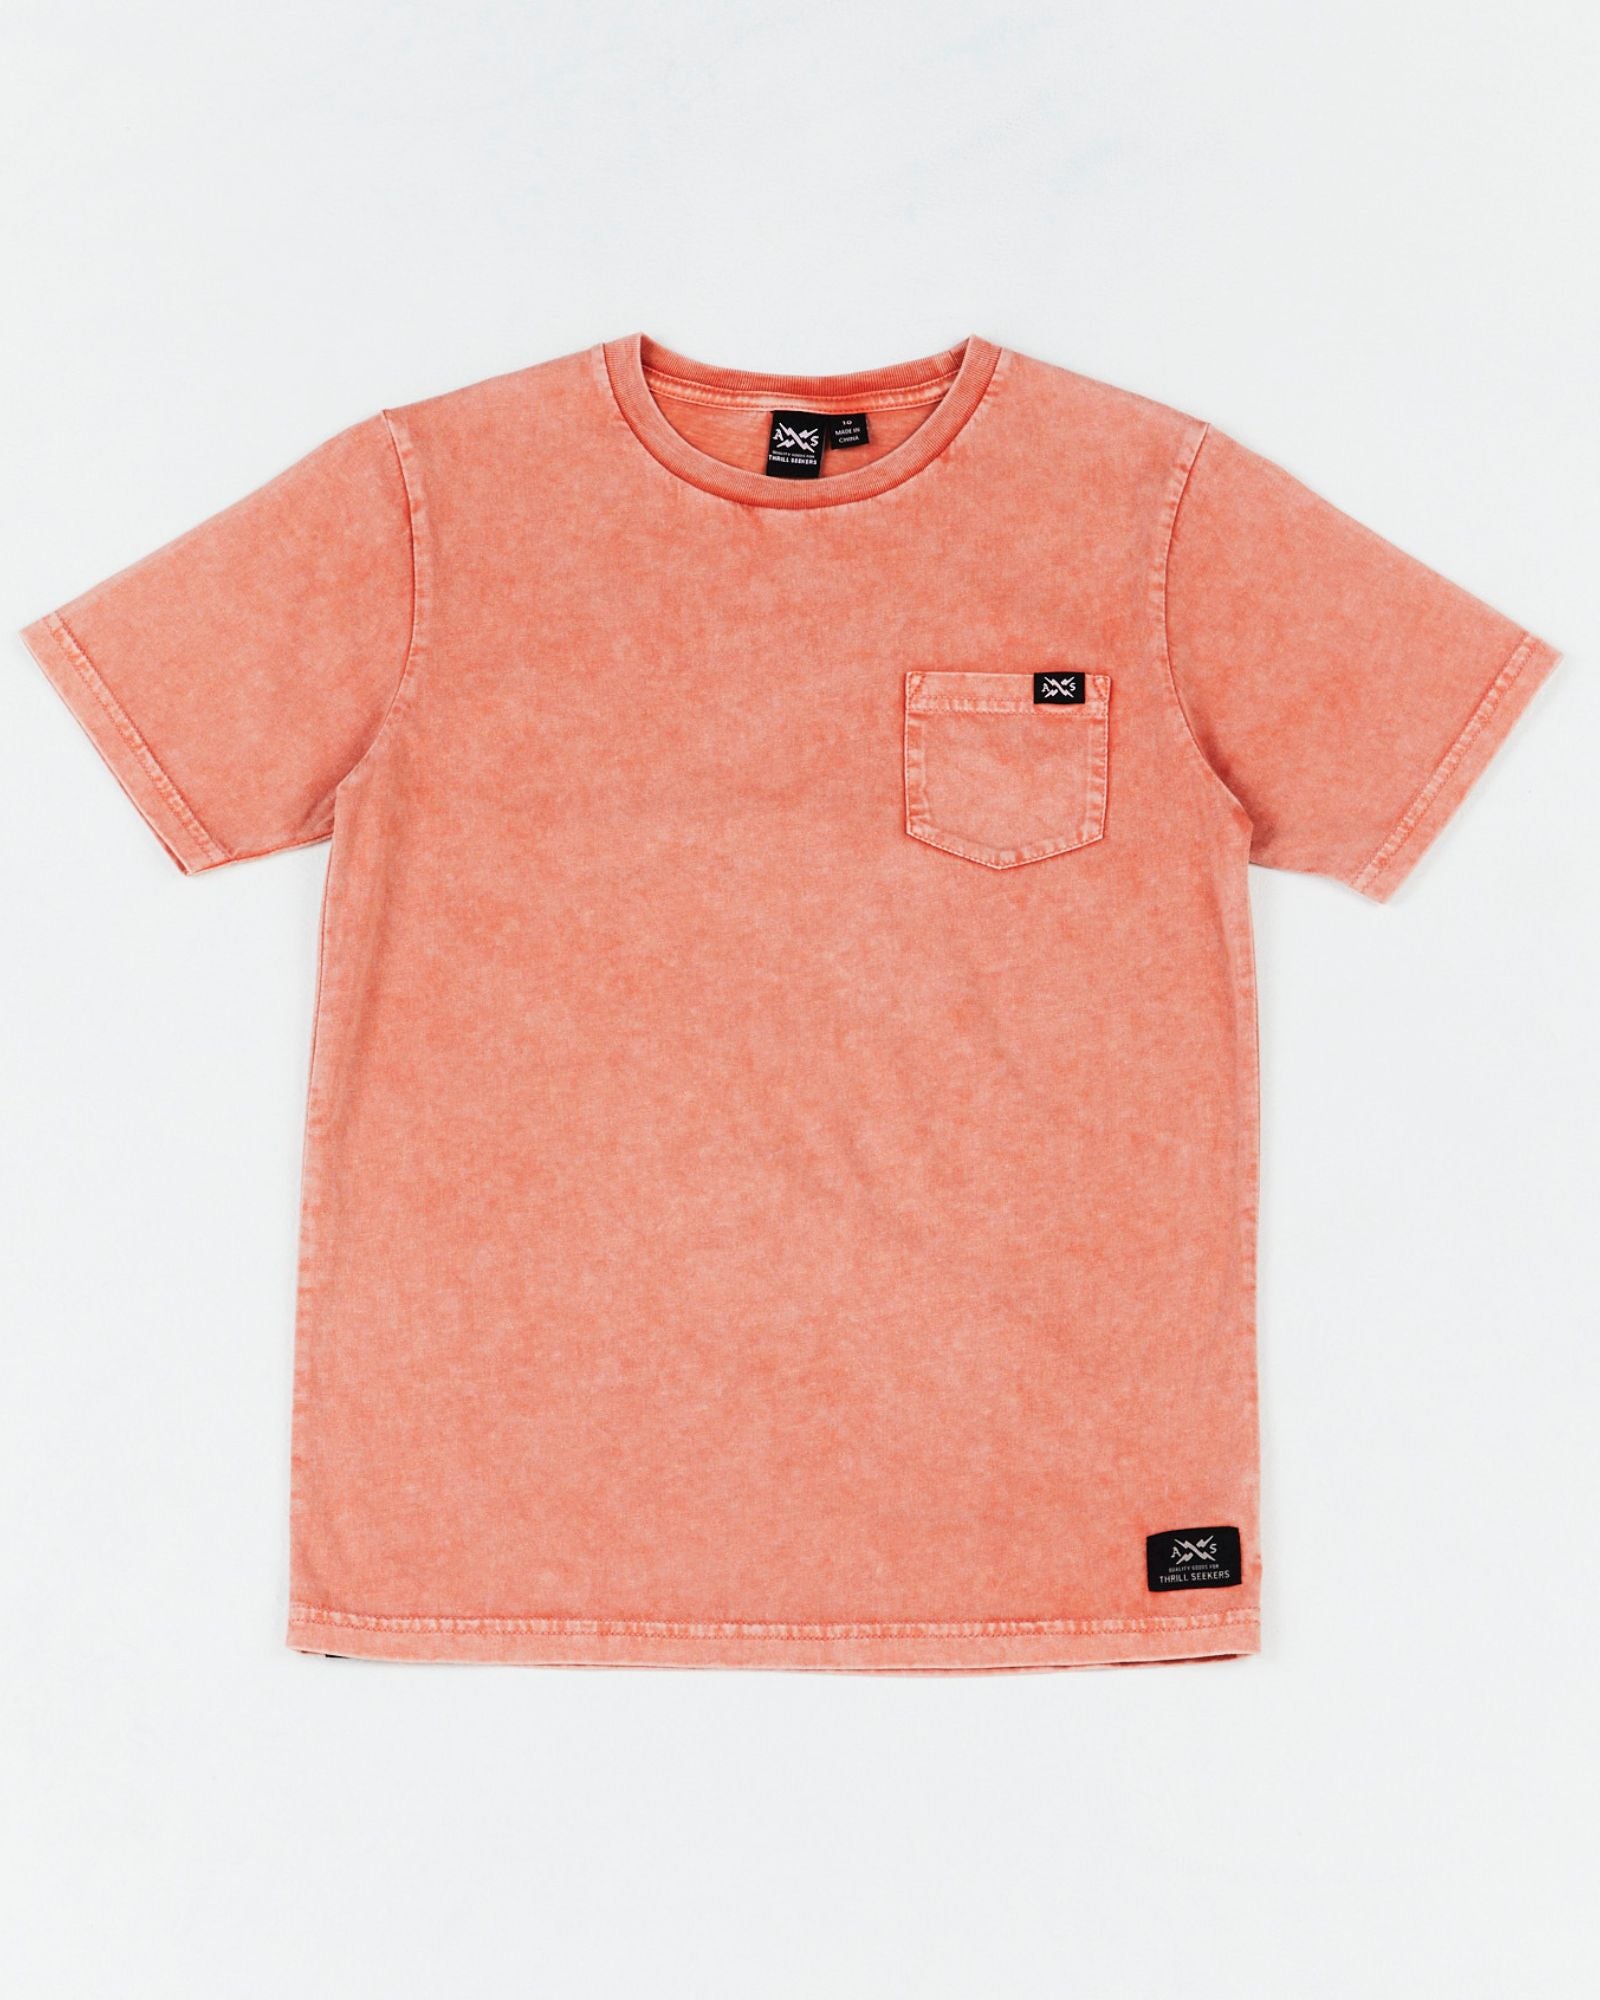 Alphabet Soup's Kids Go To Pocket Tee for boys aged 2 to 7. Crafted in 100% cotton jersey and featuring acid wash, pocket & trim logo, Cinnamon hue, regular fit, ribbed neckline, short sleeves and straight hem.